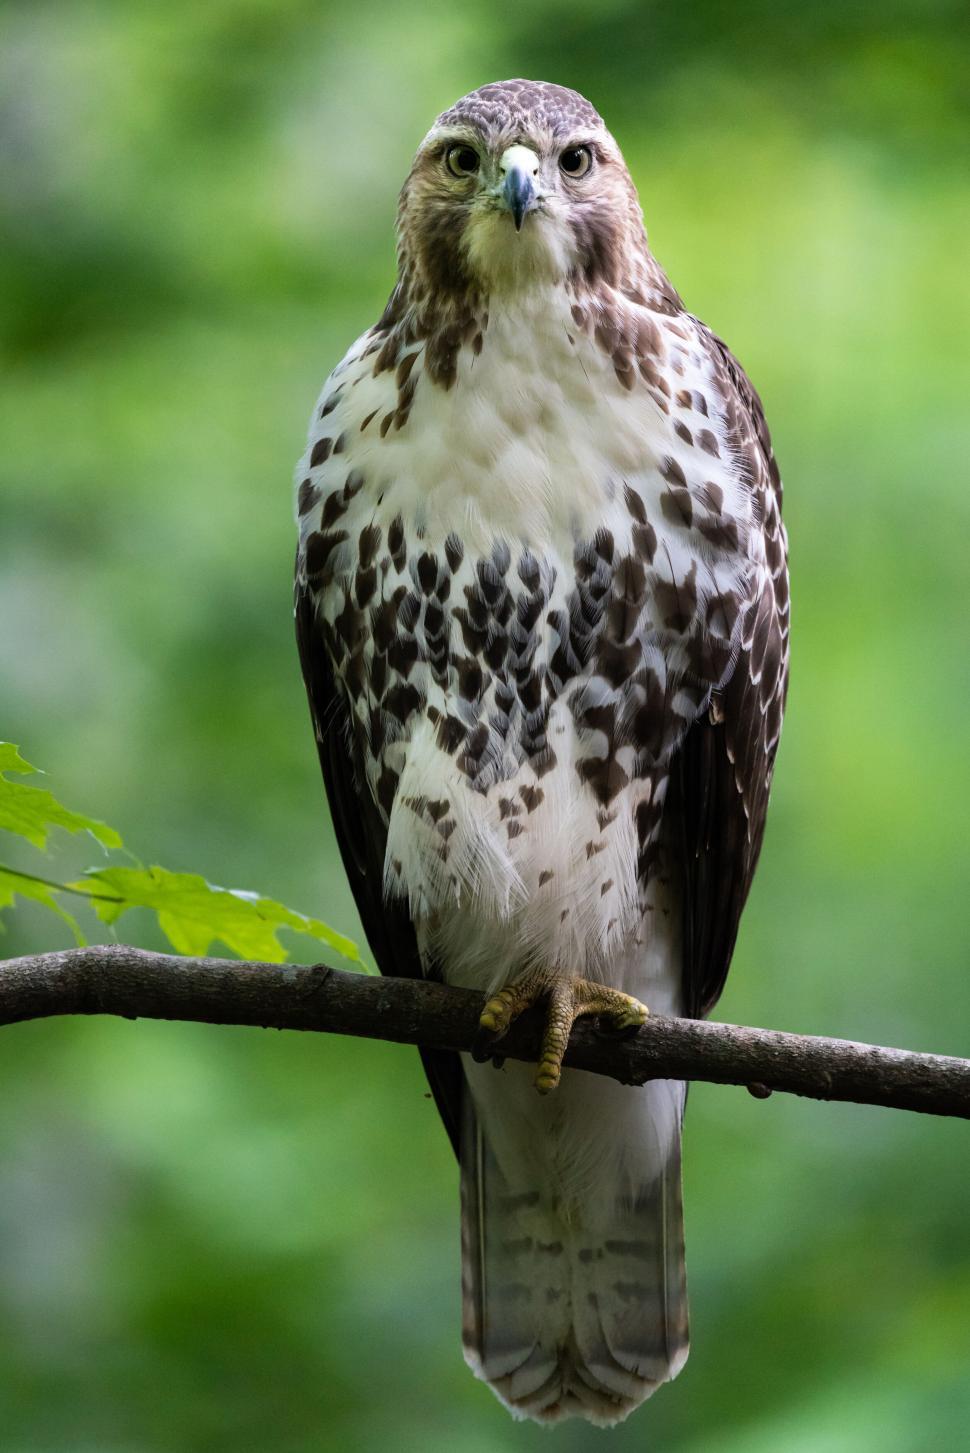 Free Image of Bird of Prey Perched on Branch with Vibrant Green Background 